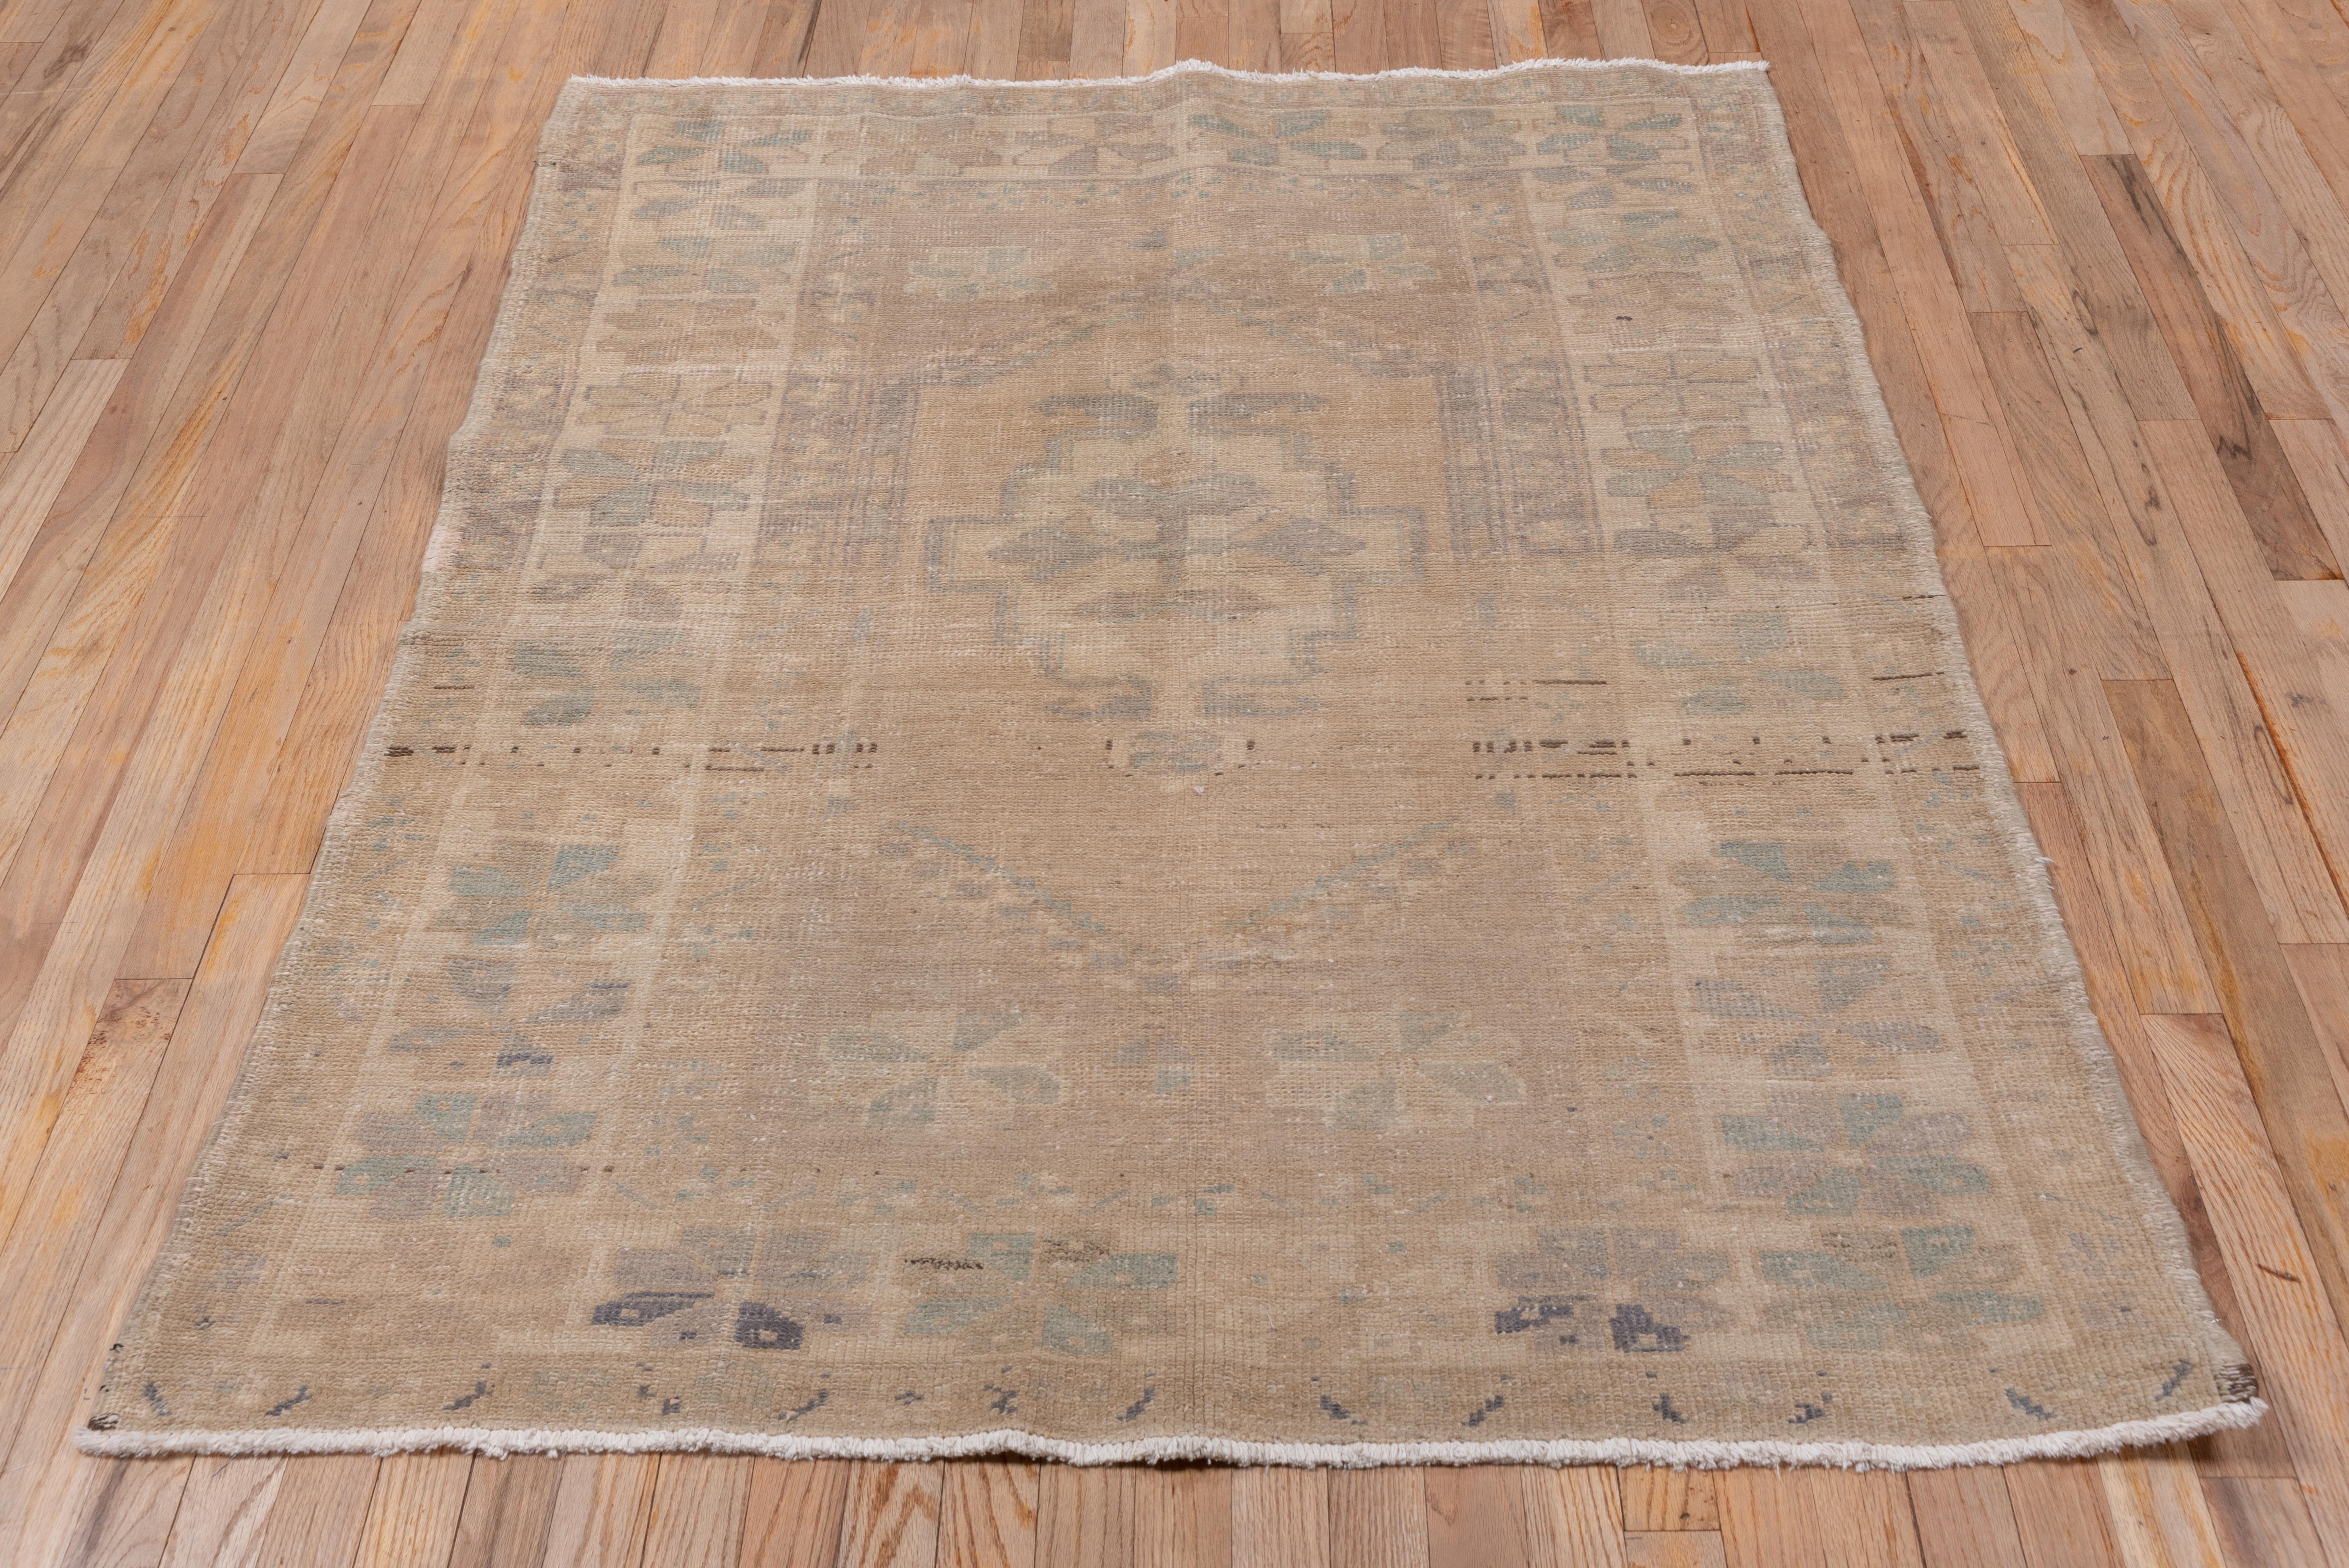 A light tone-on-tone scatter with a few dark brown abrash accents, this coarsely knotted village scatter has a sand stepped medallion with a cruciform palmette center, set within a border system including a wide sand band with large squared-off